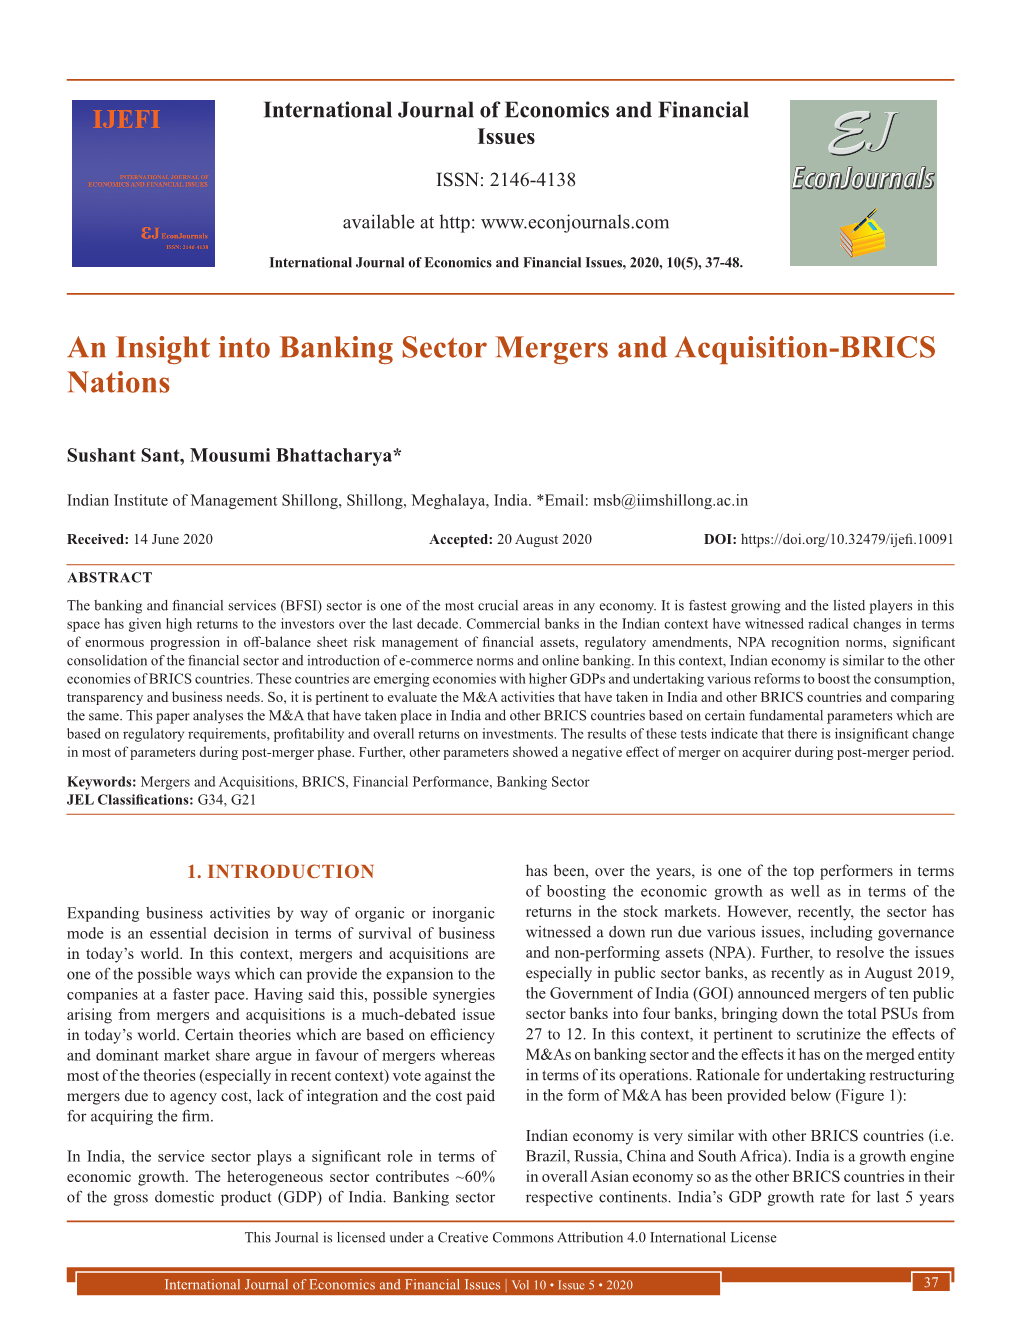 An Insight Into Banking Sector Mergers and Acquisition-BRICS Nations